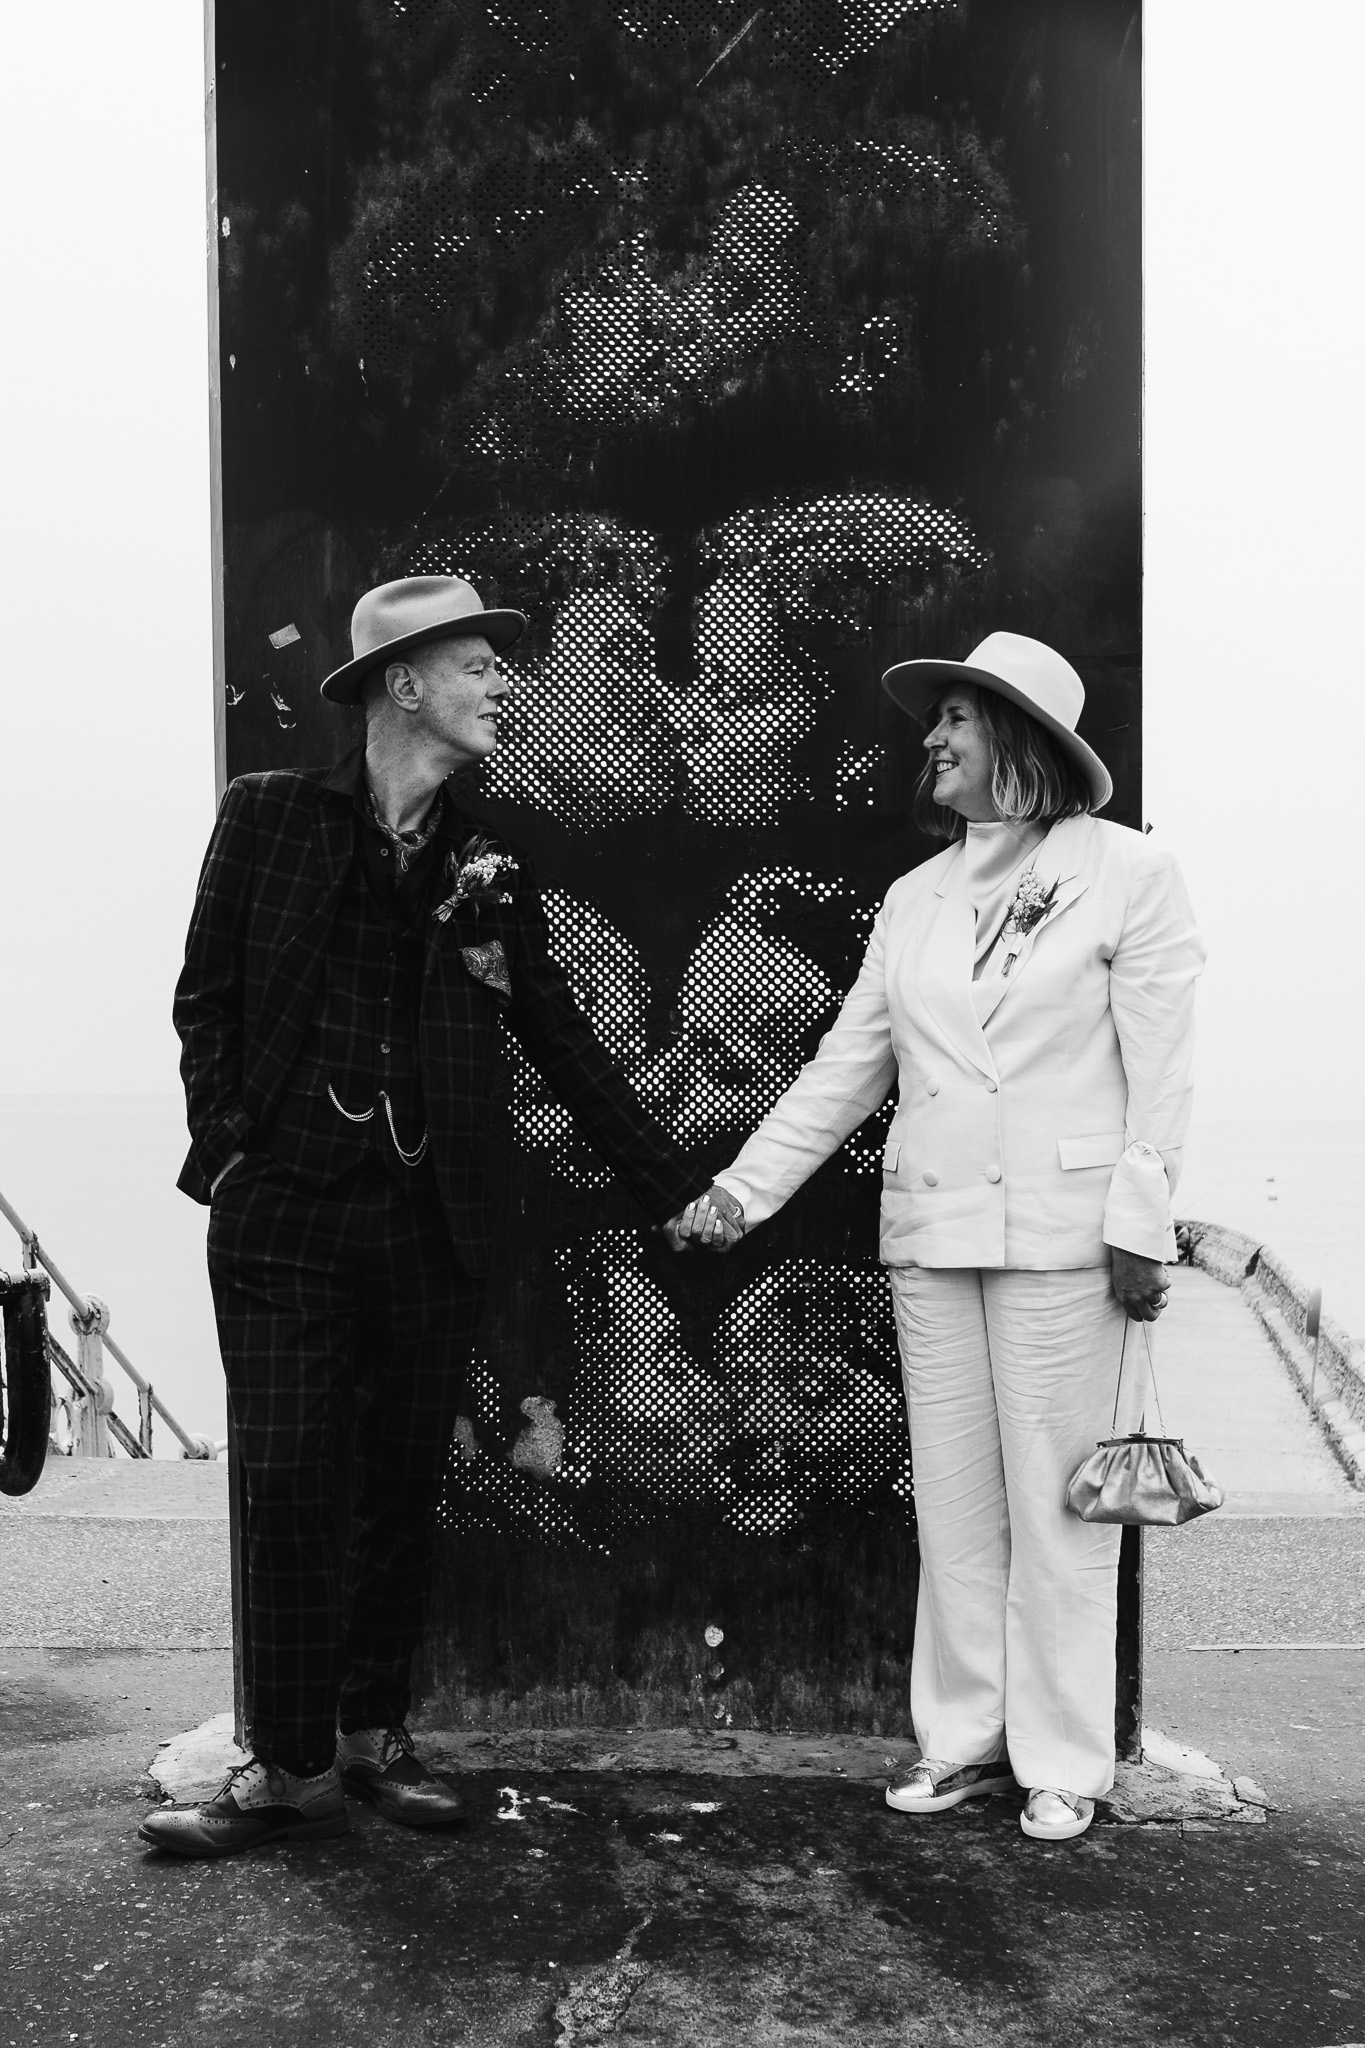 Mary and Mike hold hands as they pose together in front of the kissing statue next to Brighton beach.